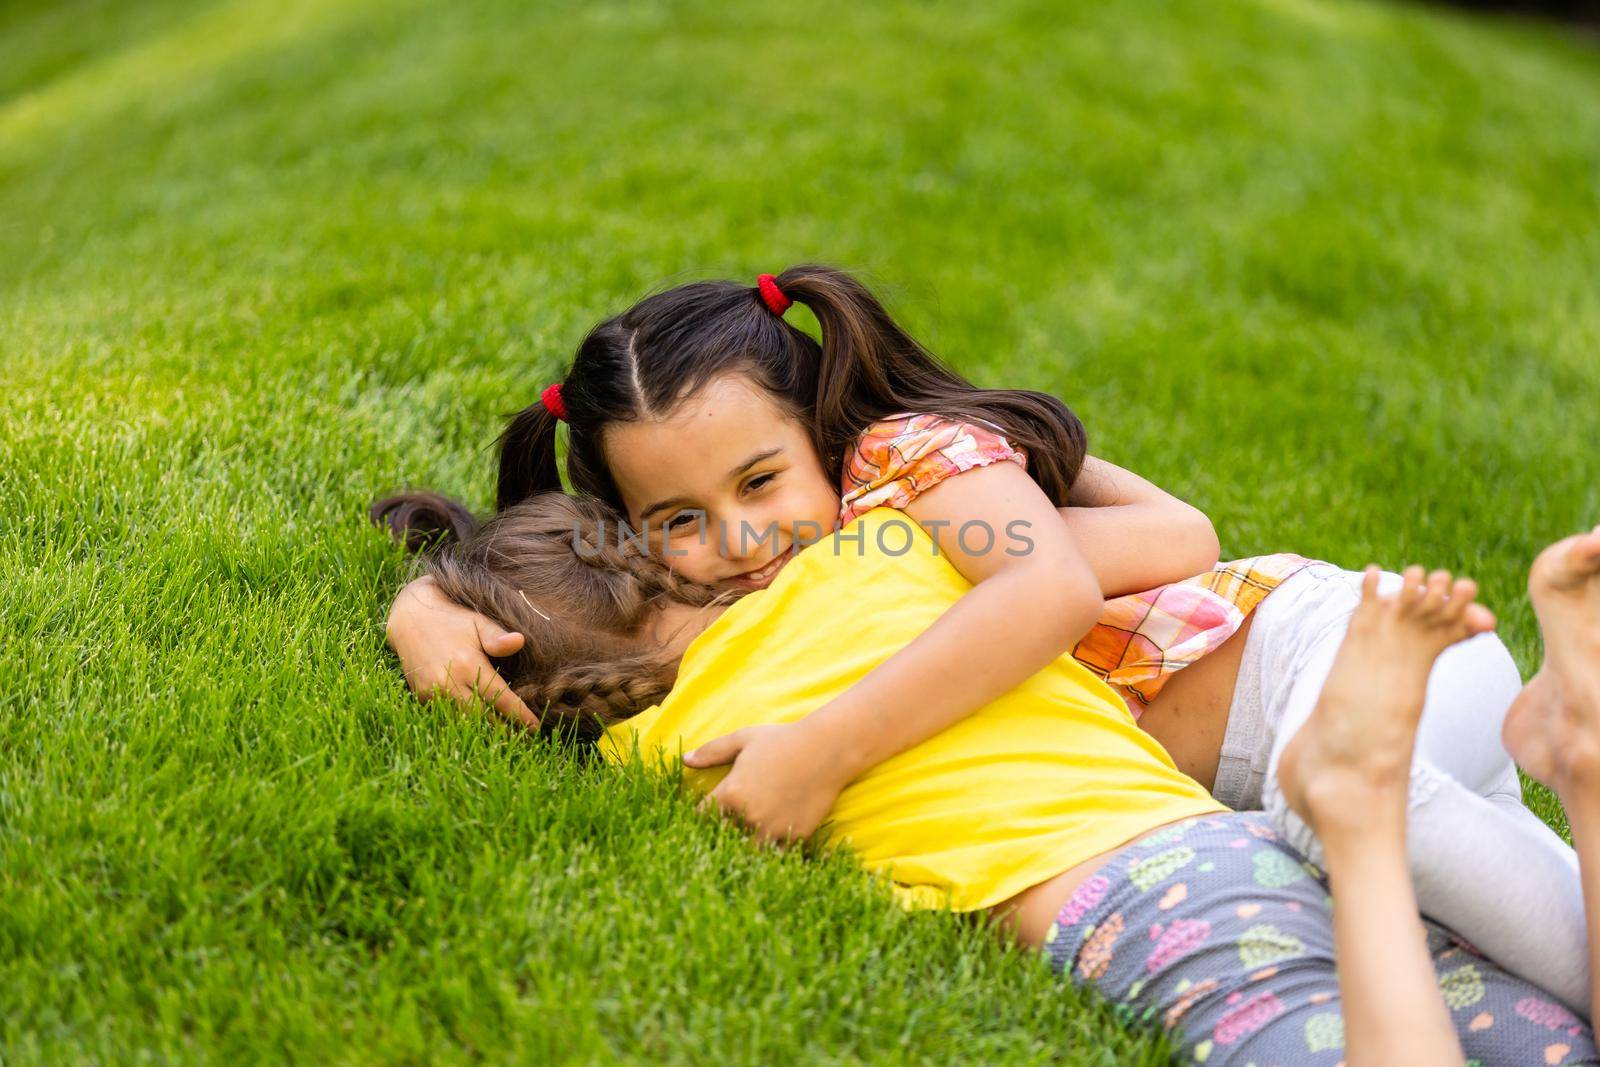 Portrait of two little girls sisters fighting on home backyard. Friends girls having fun. Lifestyle candid family moment of siblings quarreling playing together.